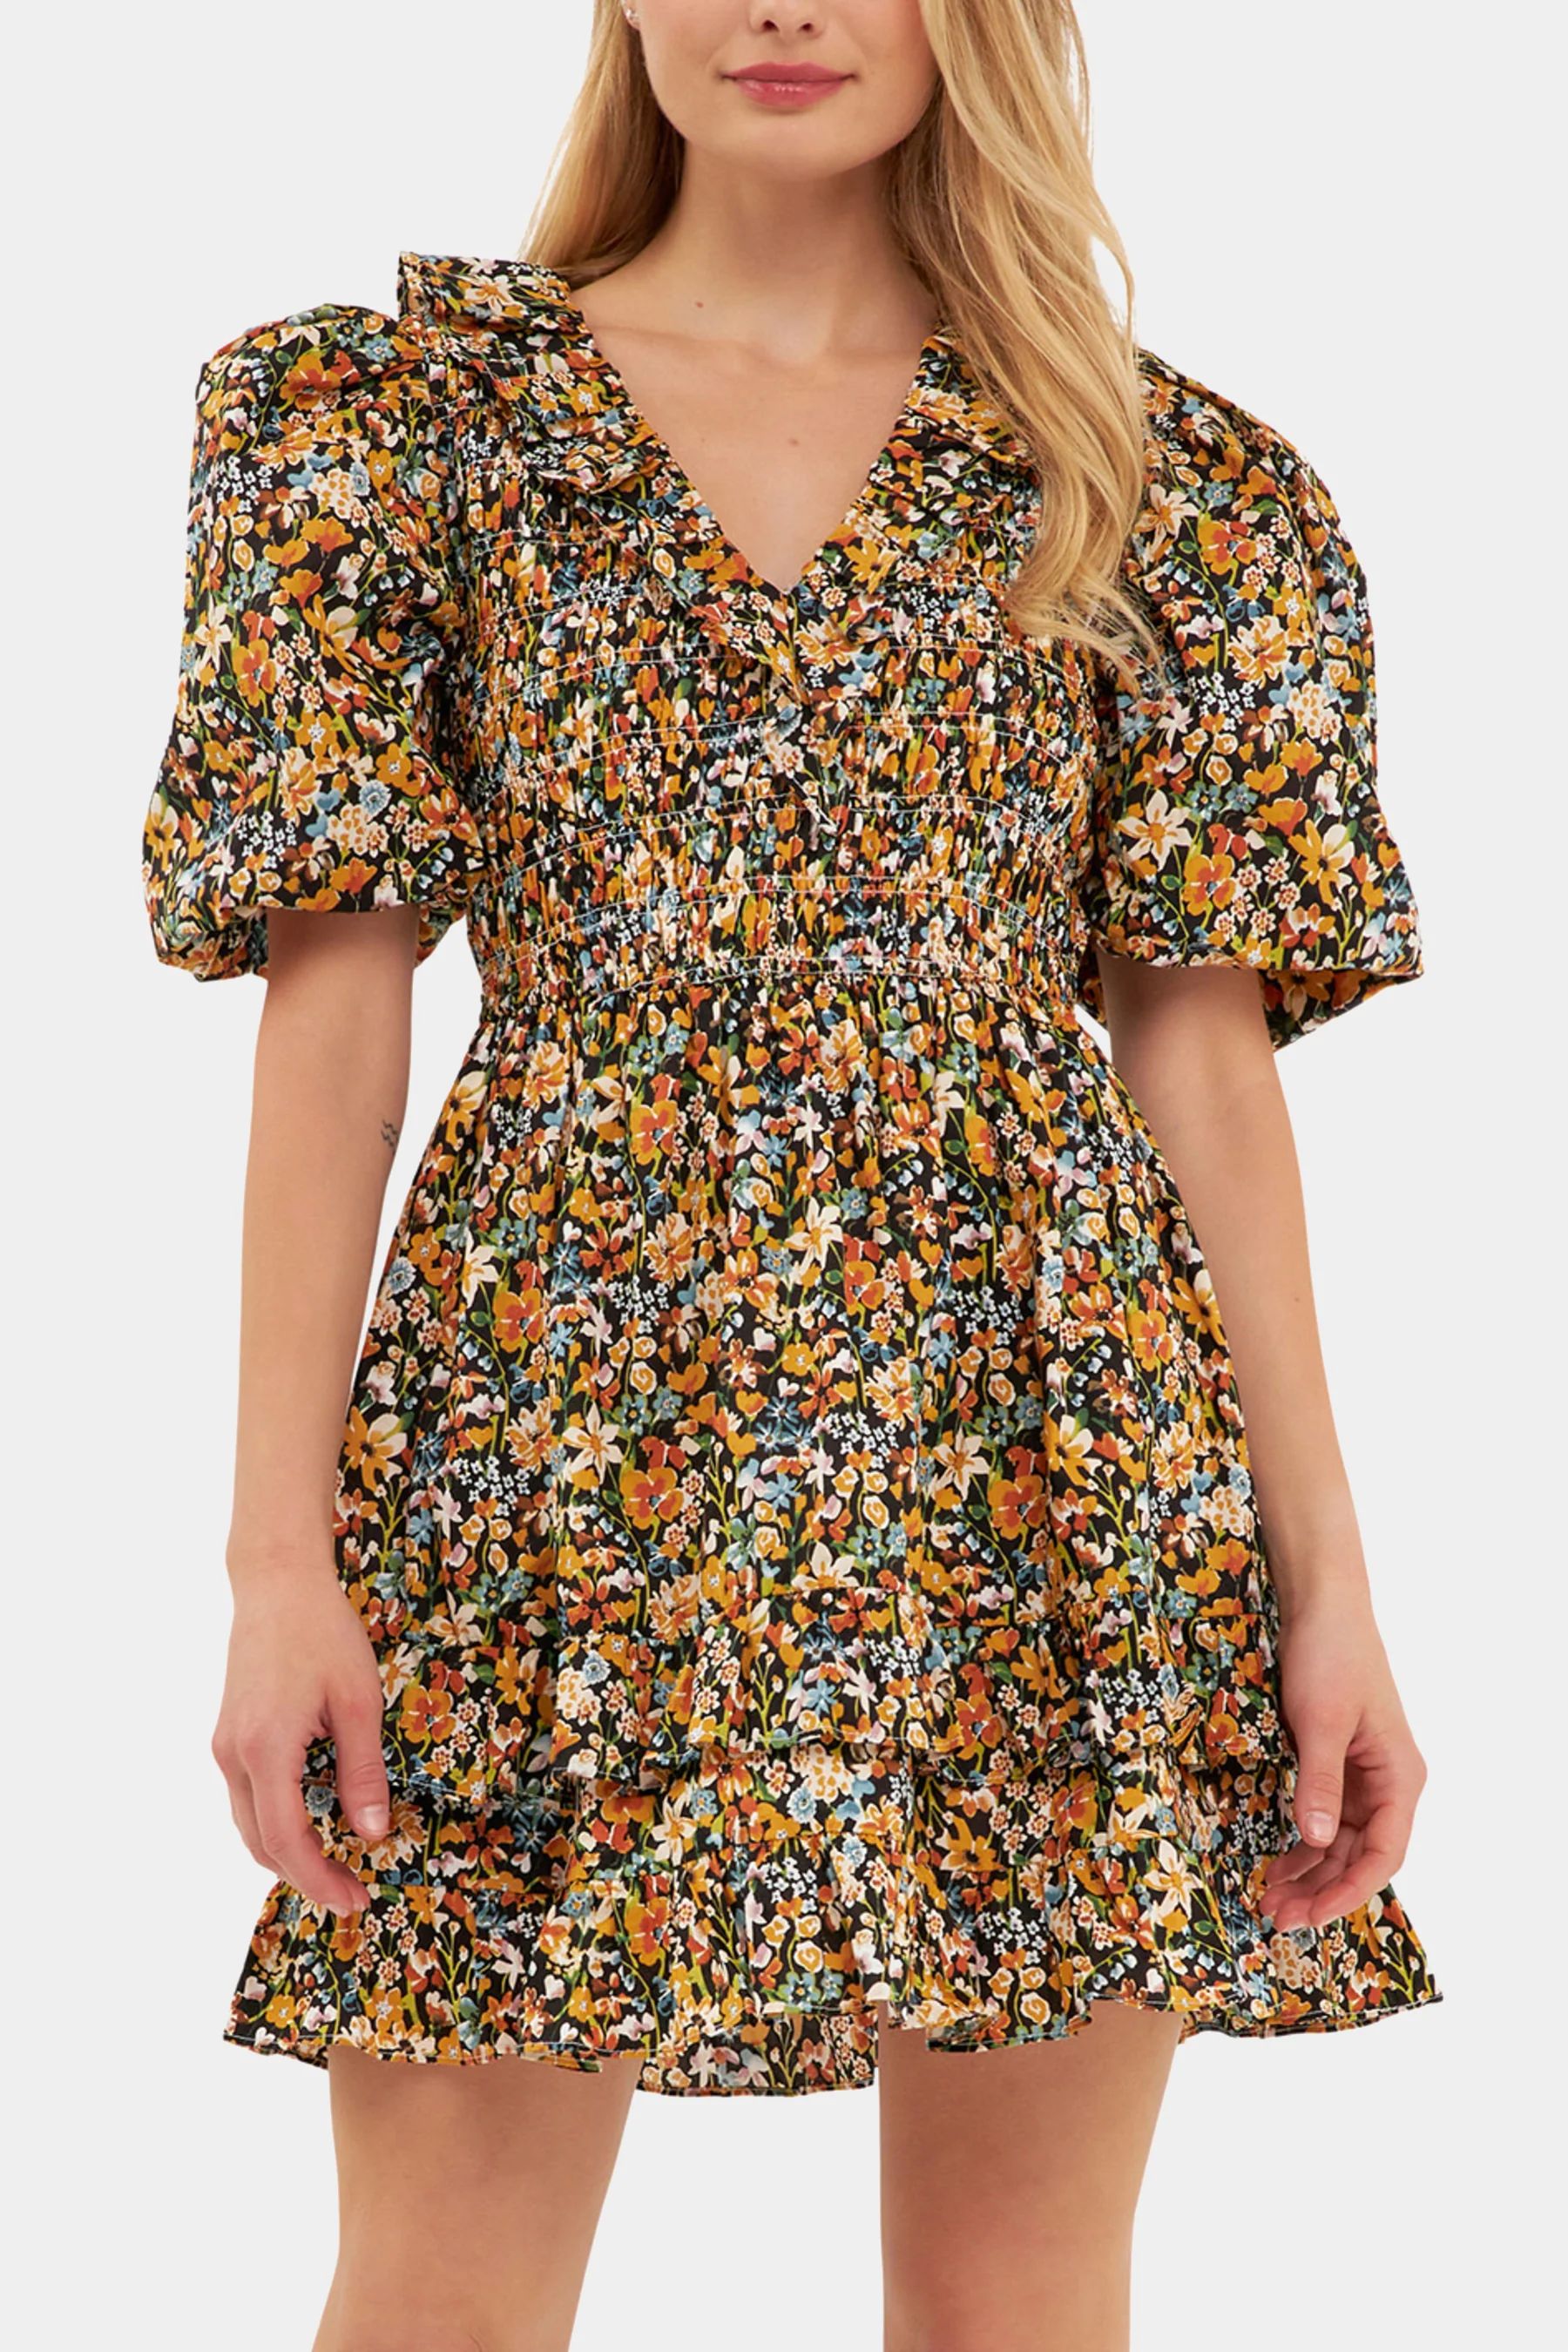 English Factory Women's Smocked Floral Mini Dress in Black Medium Lord & Taylor | Lord & Taylor